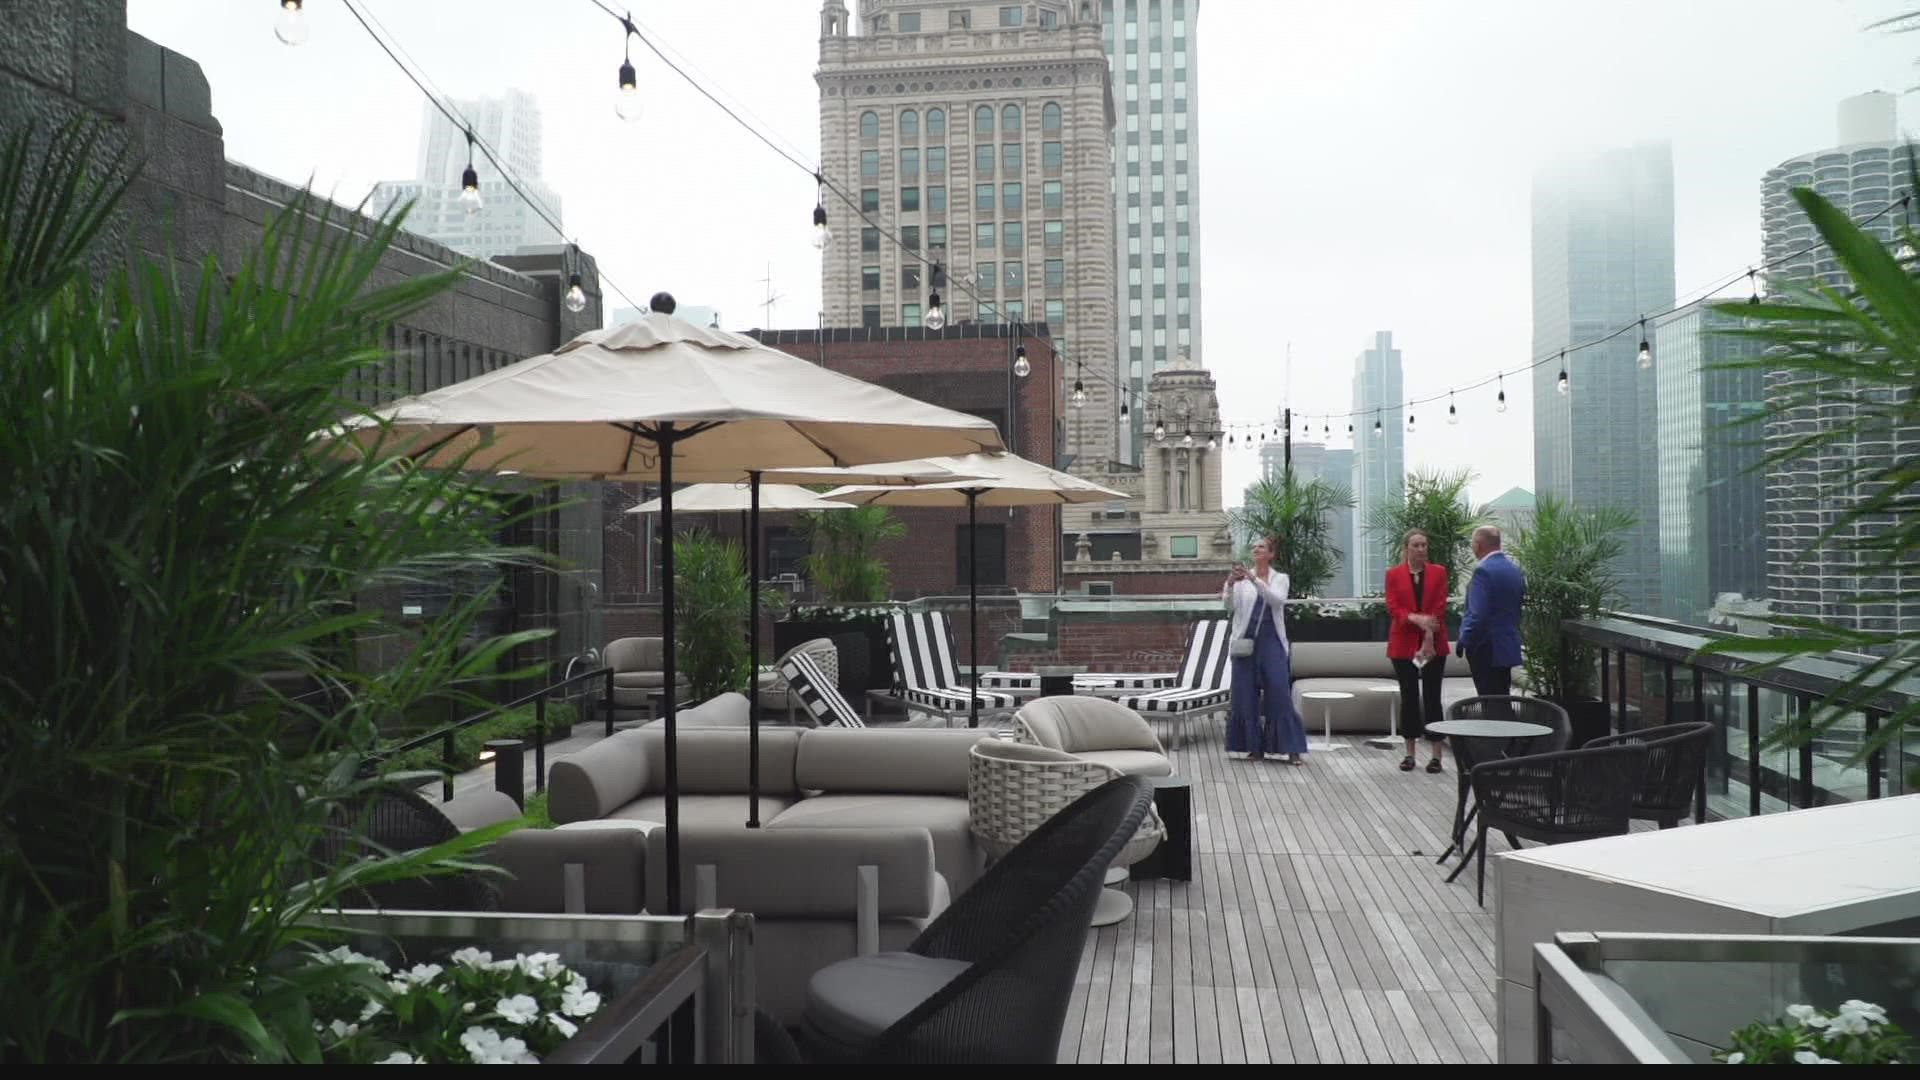 Chuck's Big Adventure is giving us an inside look at one of Chicago's newest luxury hotels.